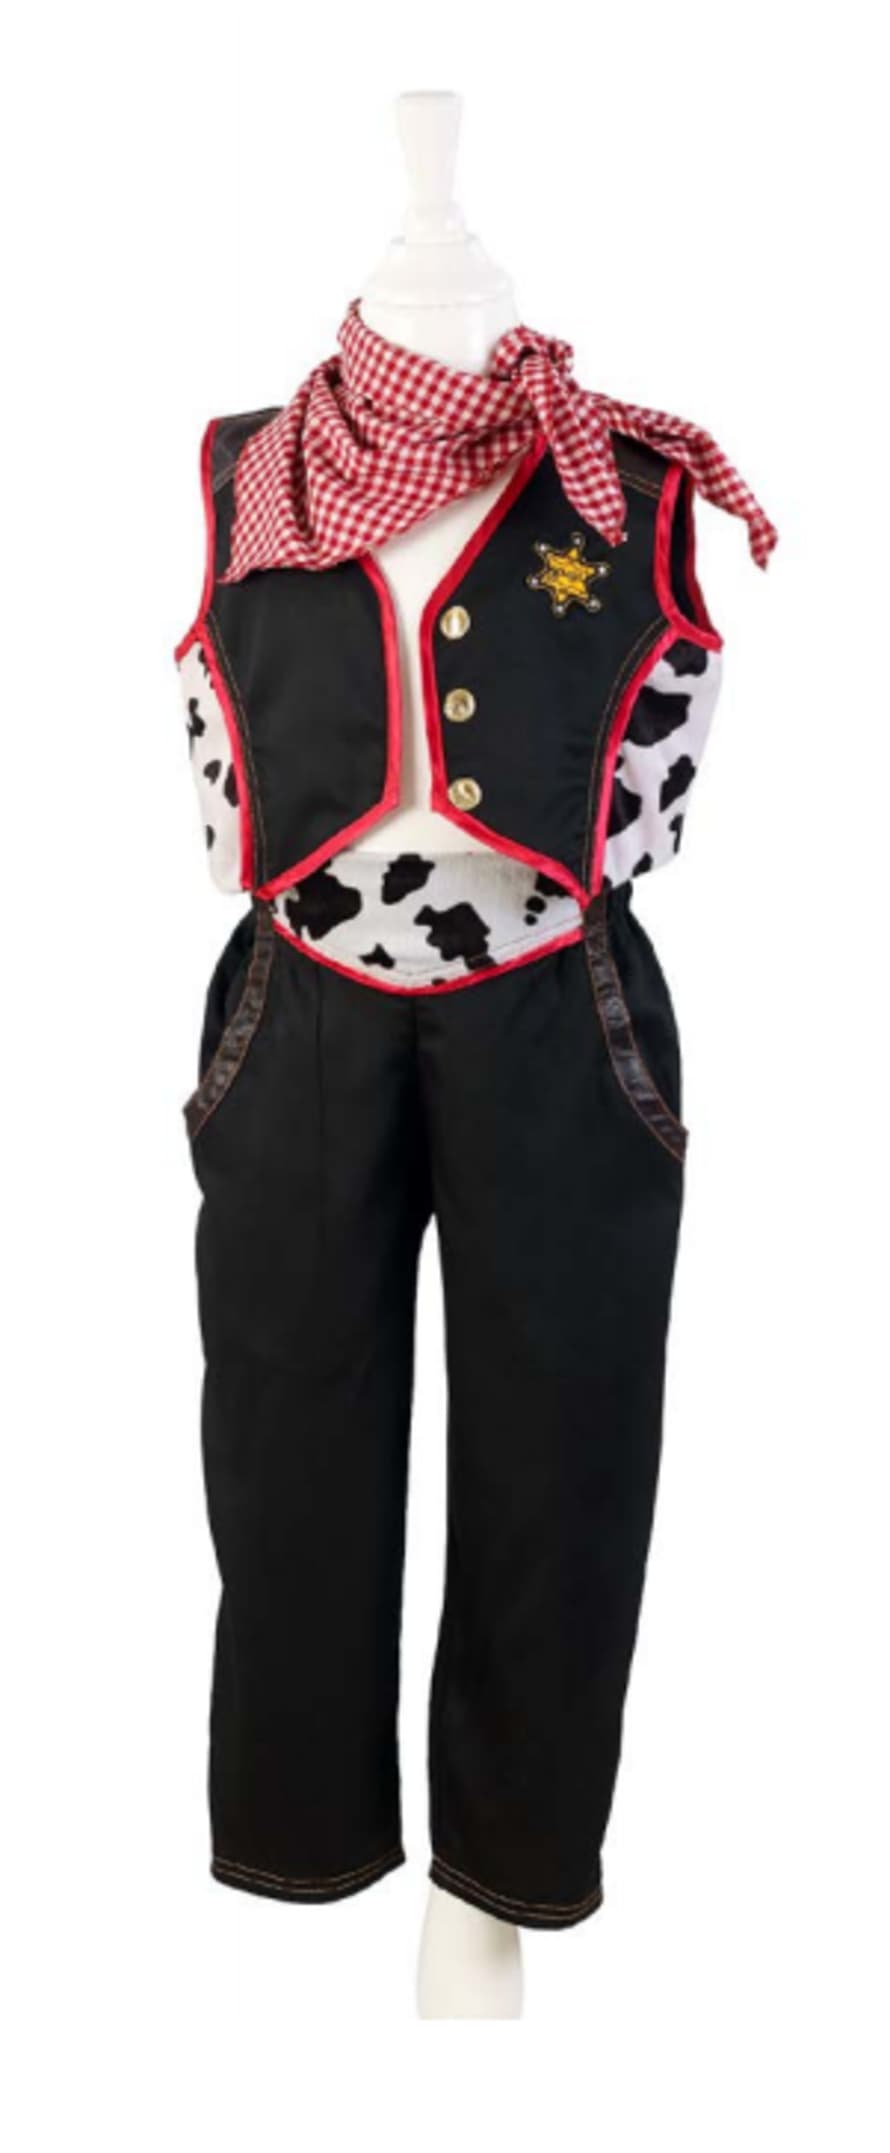 Souza Cowboy Costume for 5 to 7 Years